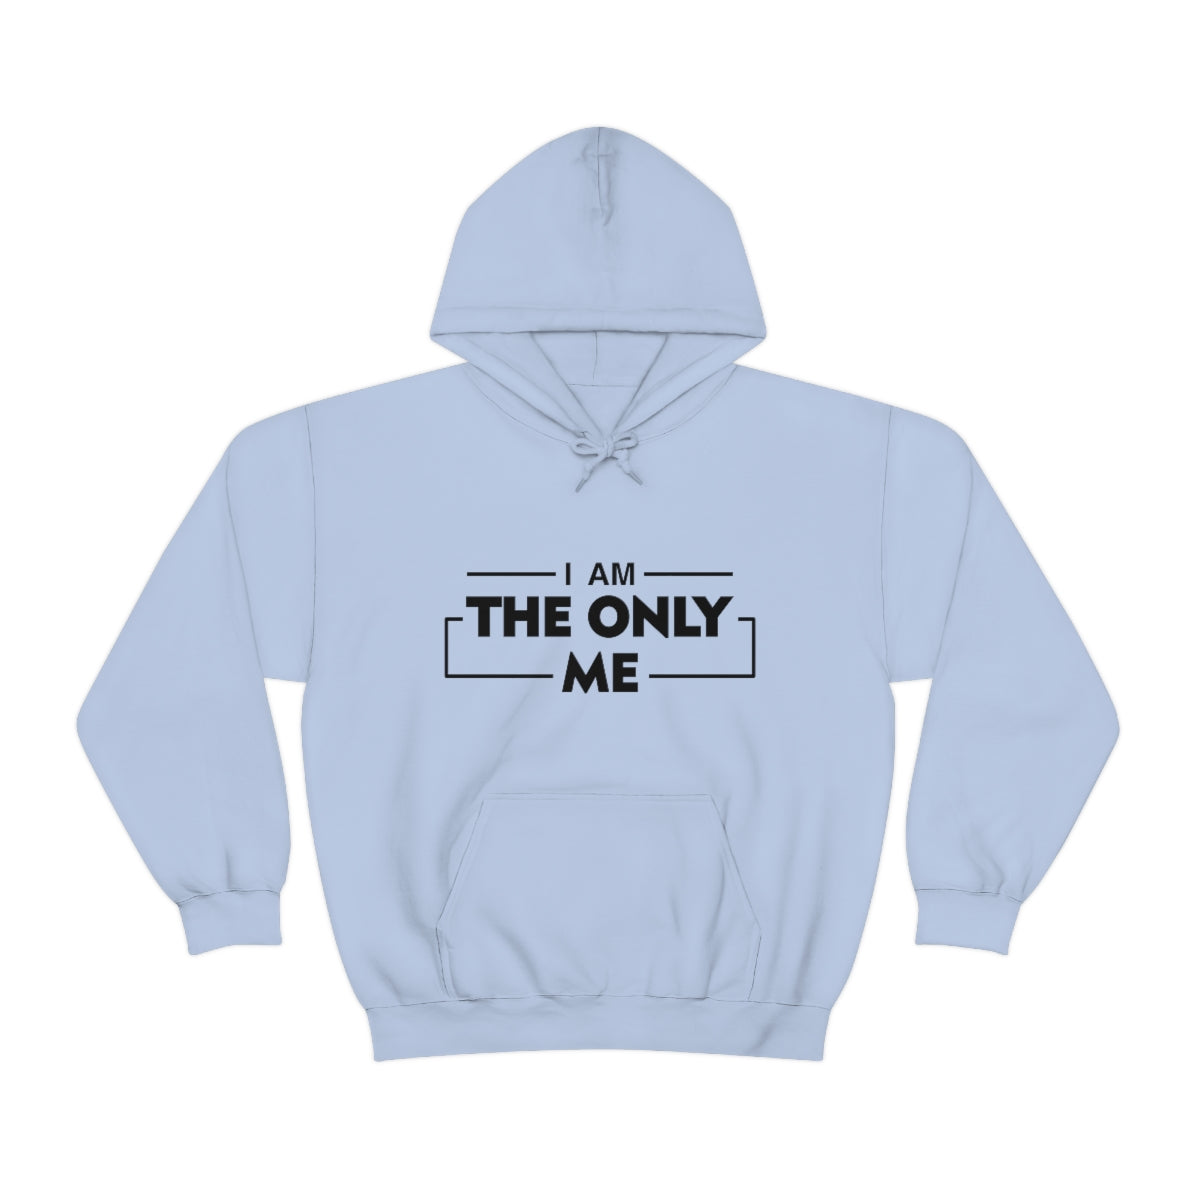 Affirmation Feminist Pro Choice Unisex Hoodie - I Am the Only Me Printify